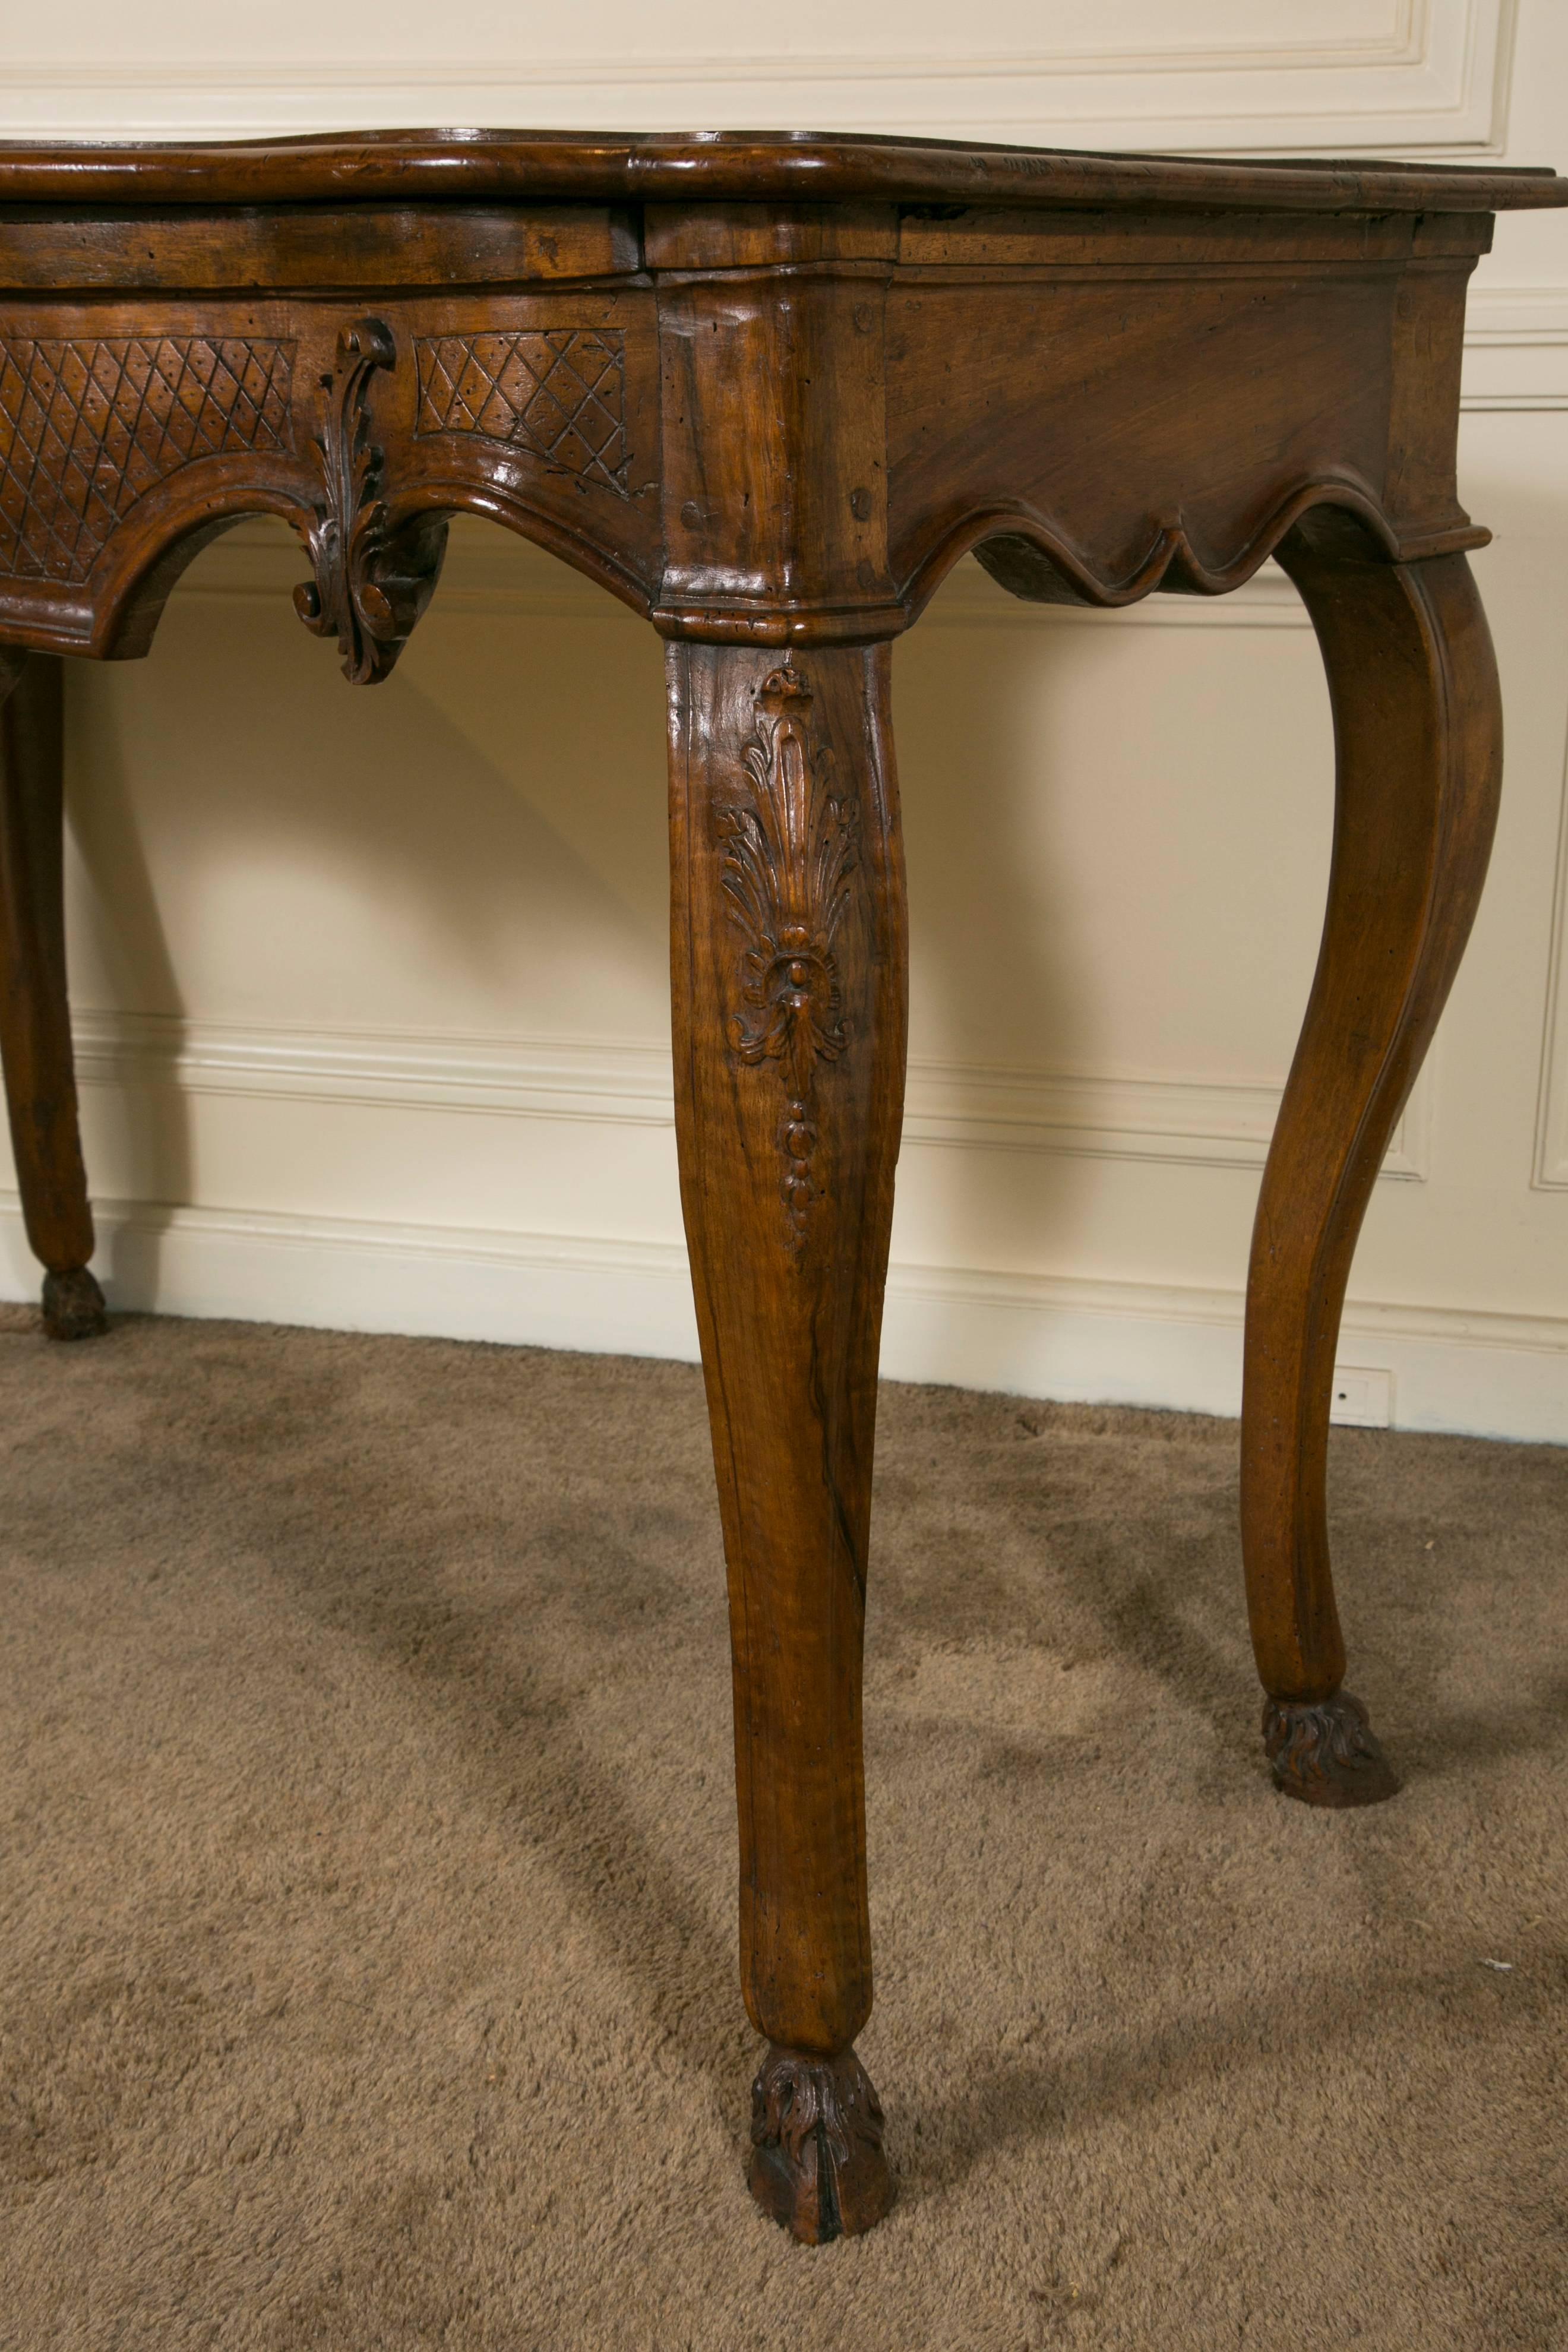 18th century beautifully and finely carved French Avignon Provence walnut wall or sofa console table with wooden top. The serpentine apron is centered with a carved large Regence shell and with a carved leaf on each side.
The four cabrioles legs